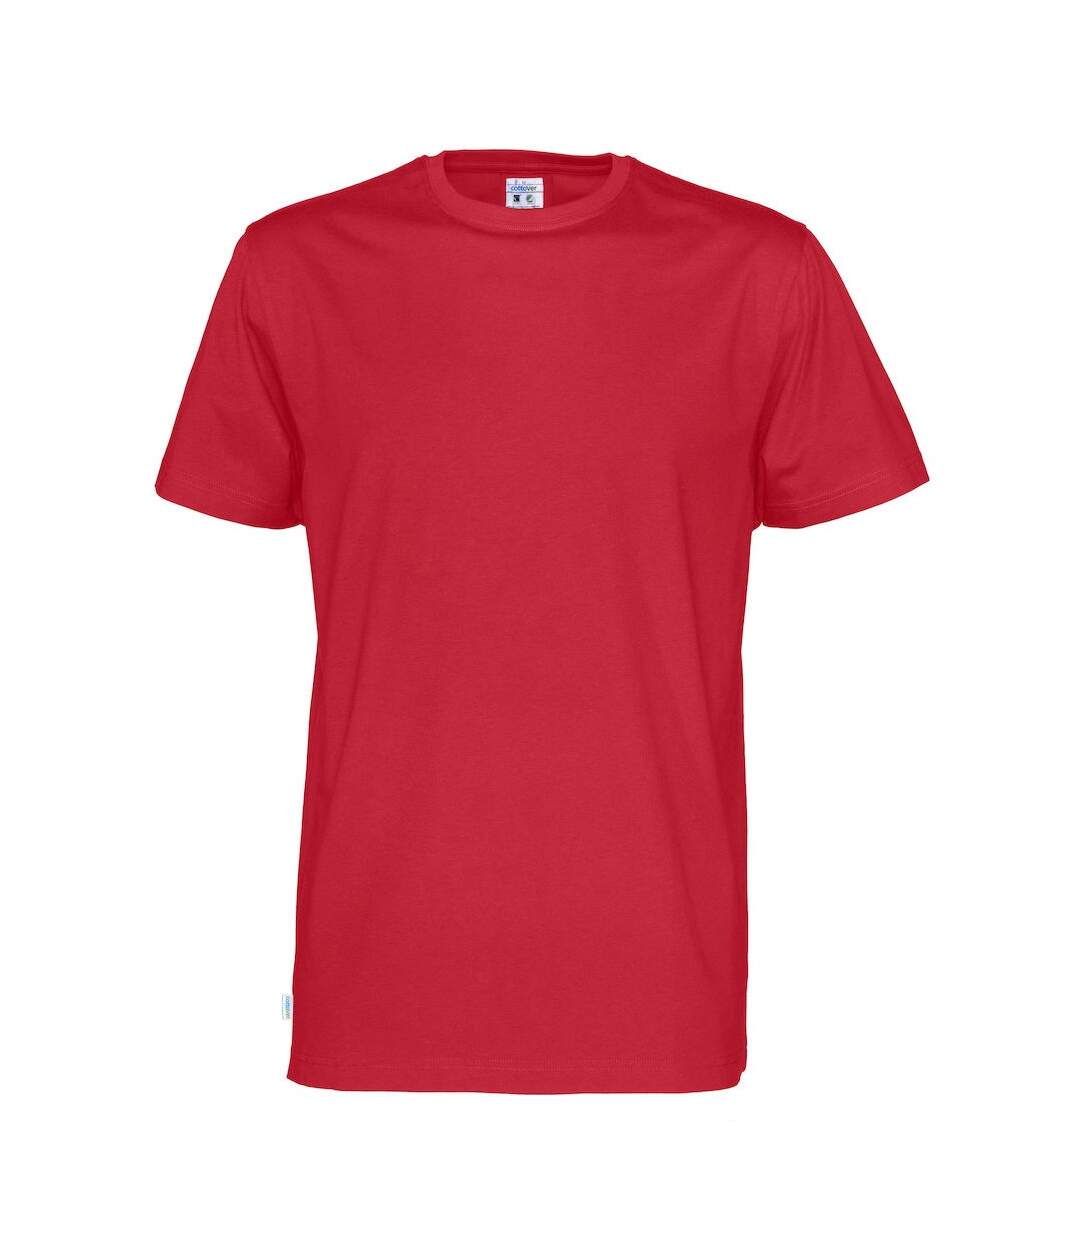 Cottover - T-shirt - Homme (Rouge) - UTUB690